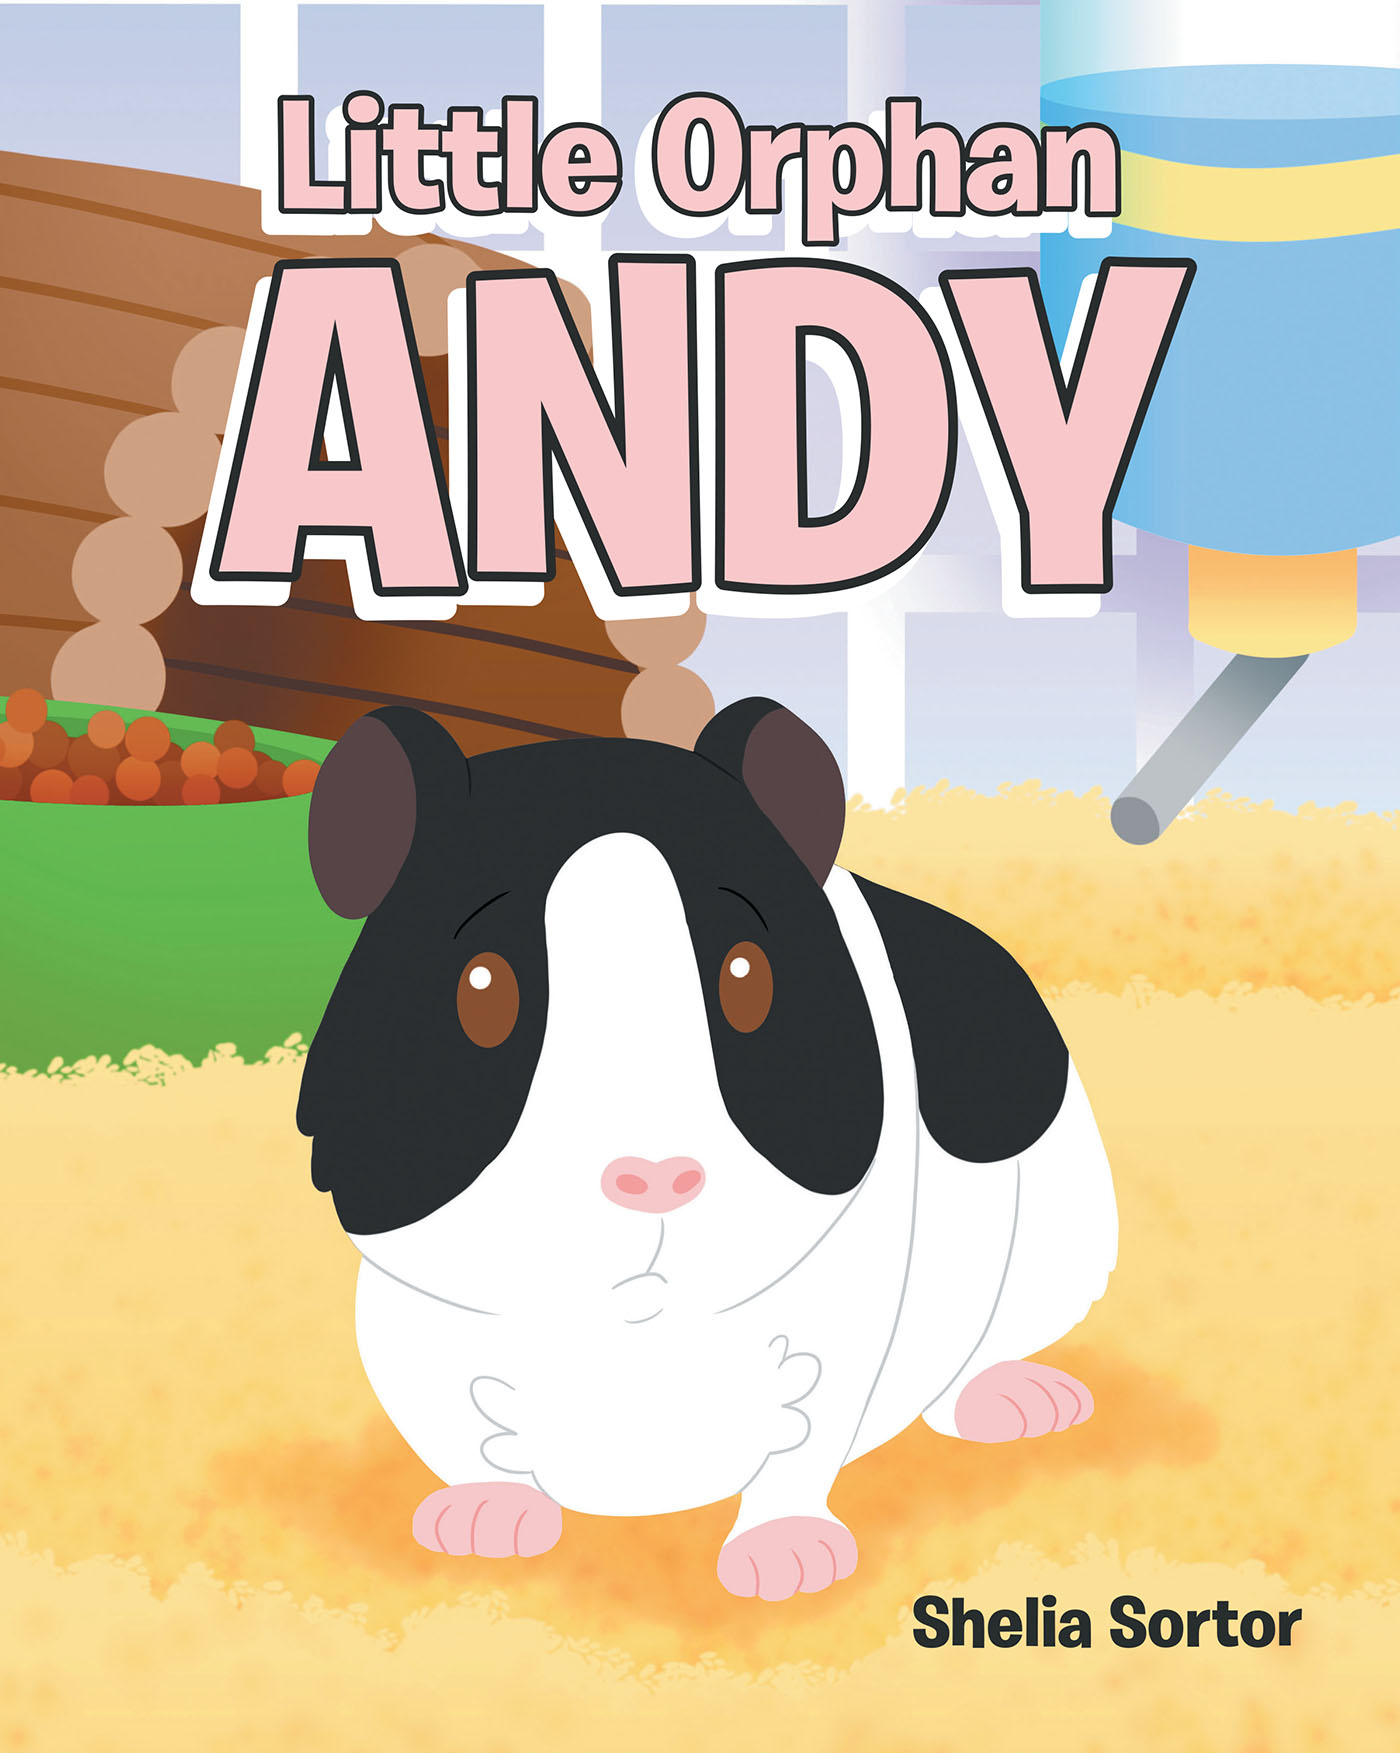 Author Shelia Sortor’s New Book, "Little Orphan Andy," Follows a Guinea Pig Who Faces Struggles Early in Life But, with the Help of His Owner, Finds Strength & Happiness